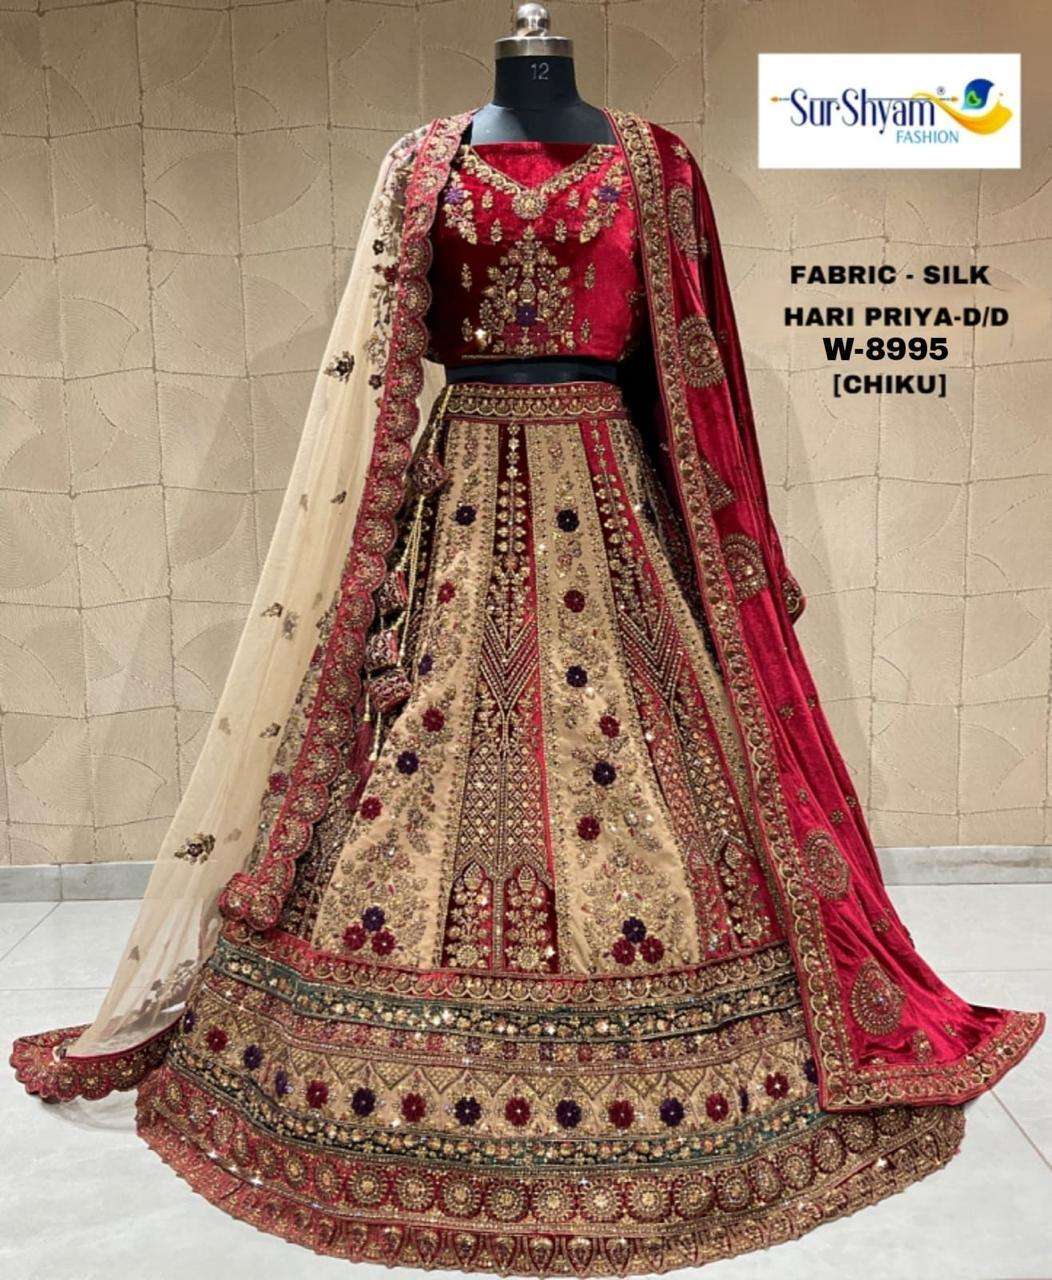 BUY BRIDAL LEHENGA HEAVY COLLECTION WITH AMAZING EMBROIDERY ...